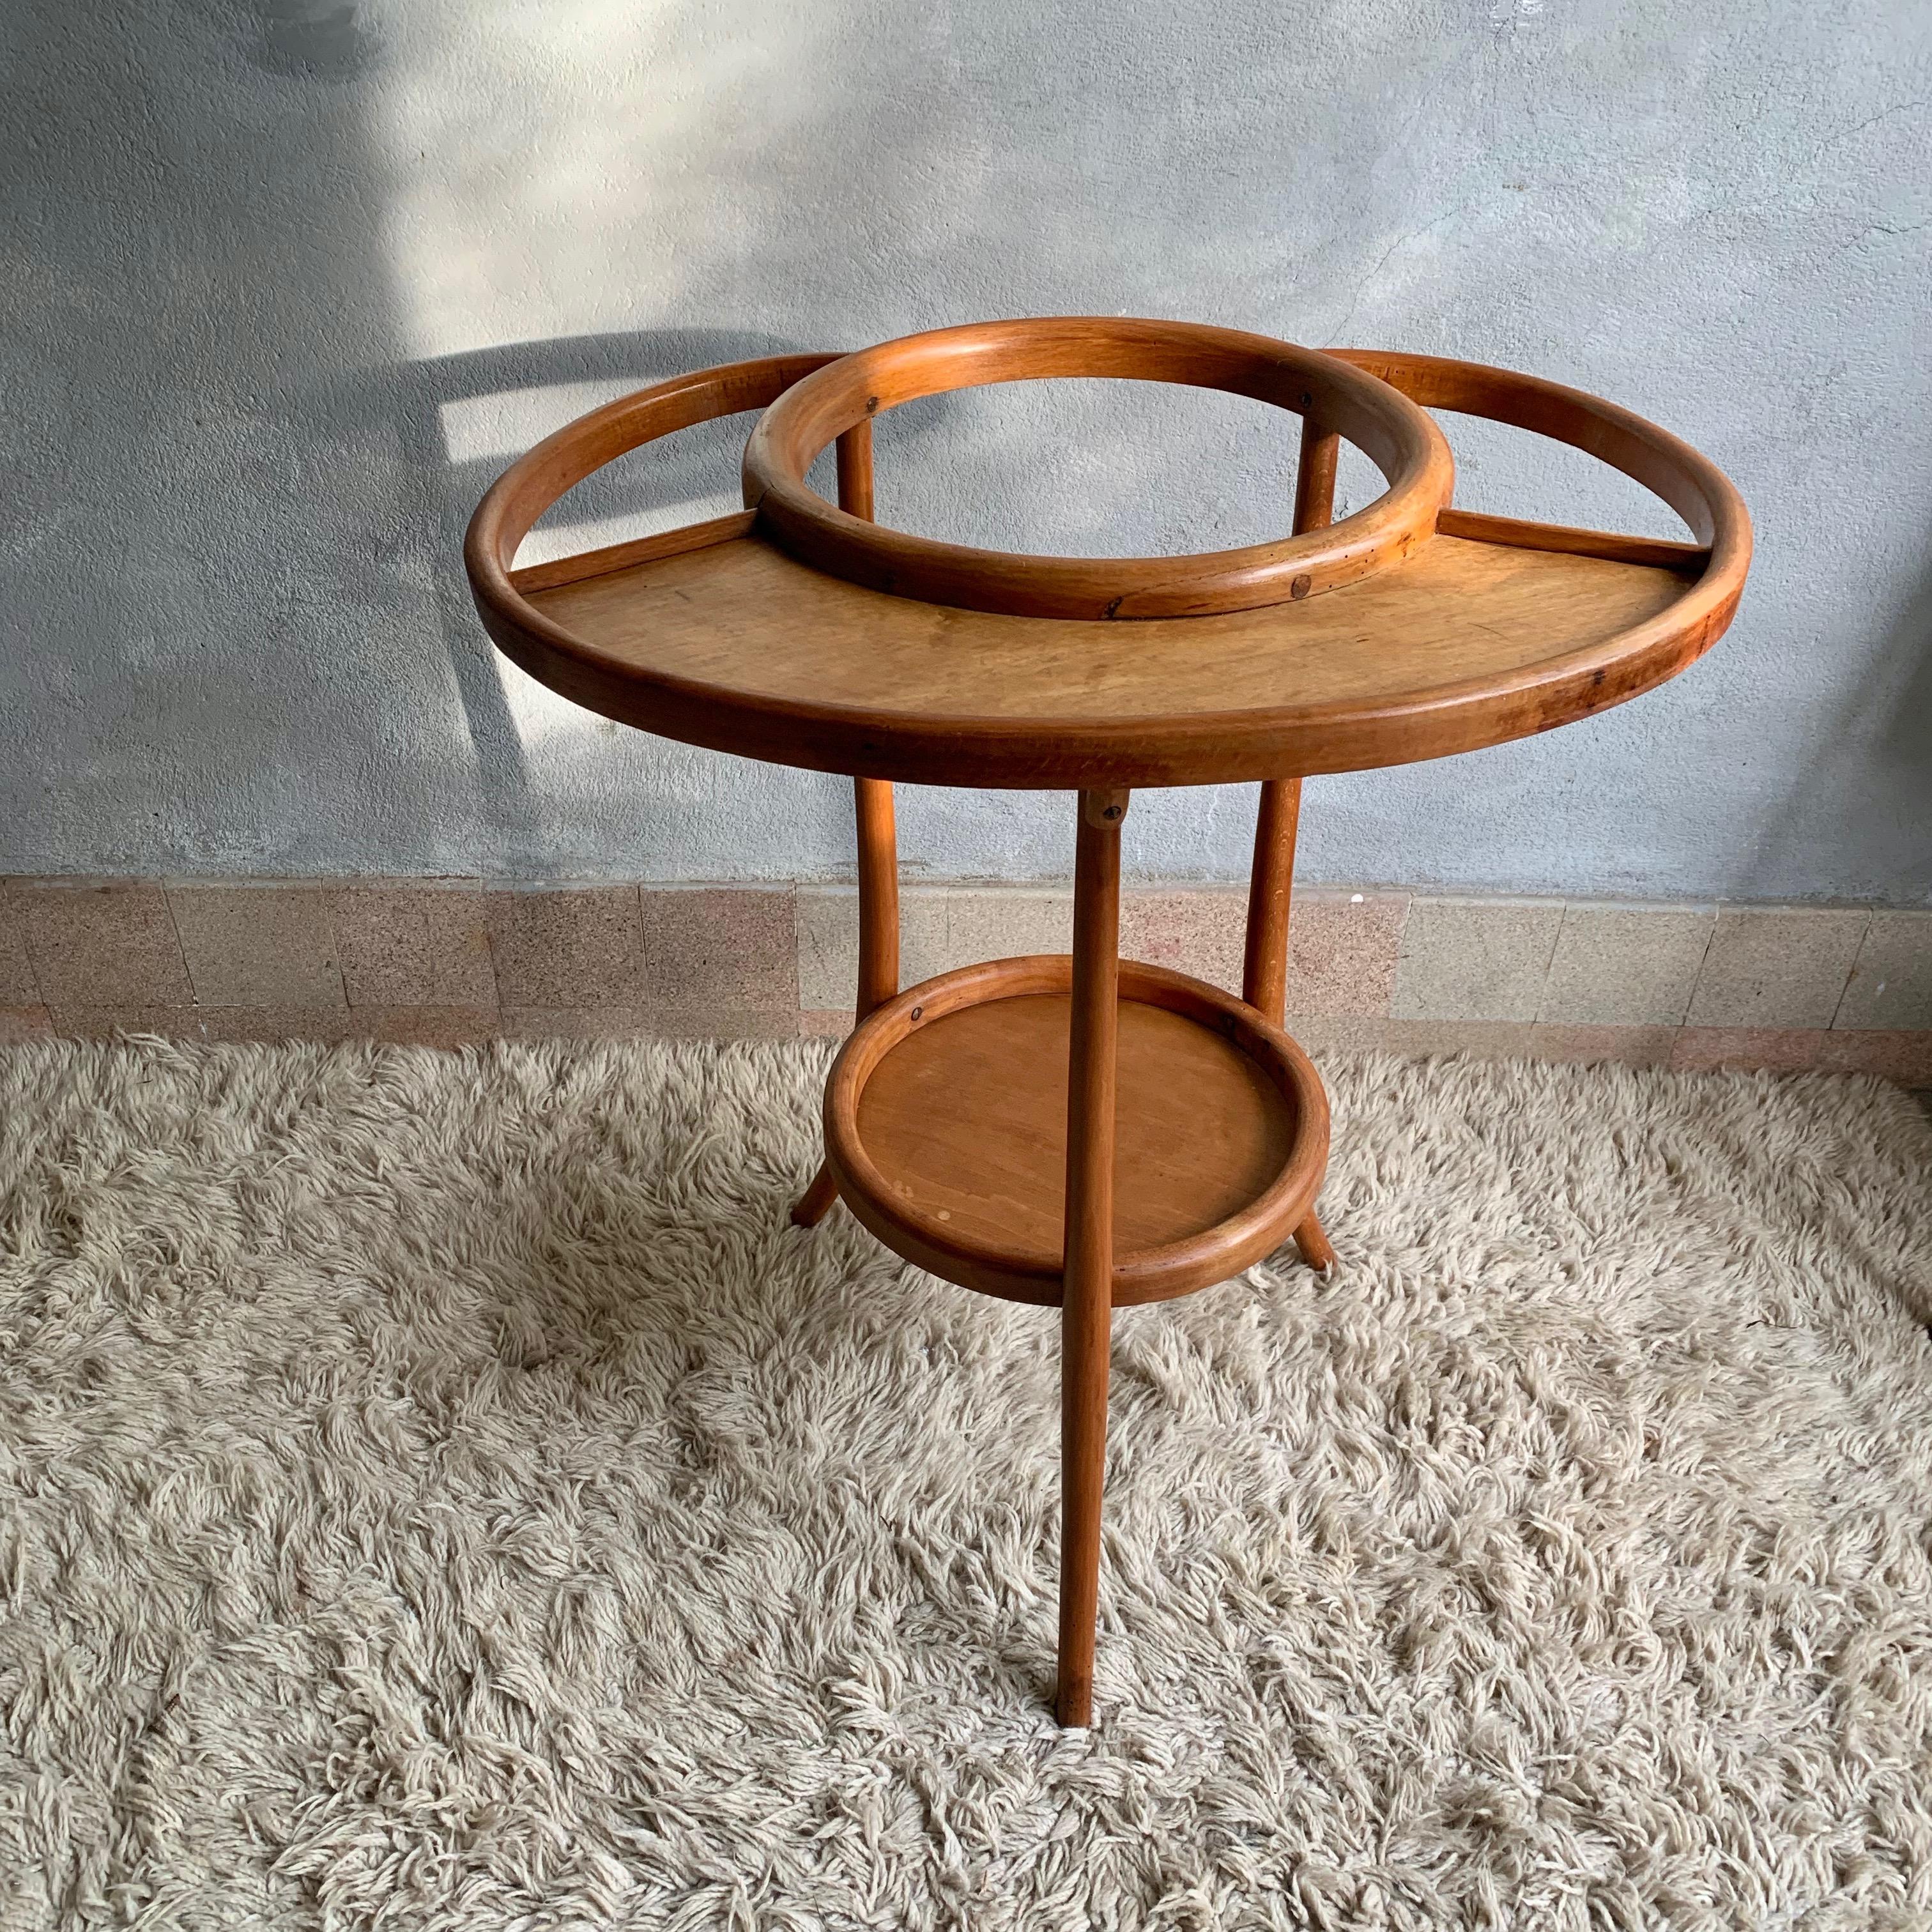 
Here is a beautiful THONET table or maid.

Originally, washbasin for domestic use or craft also called 